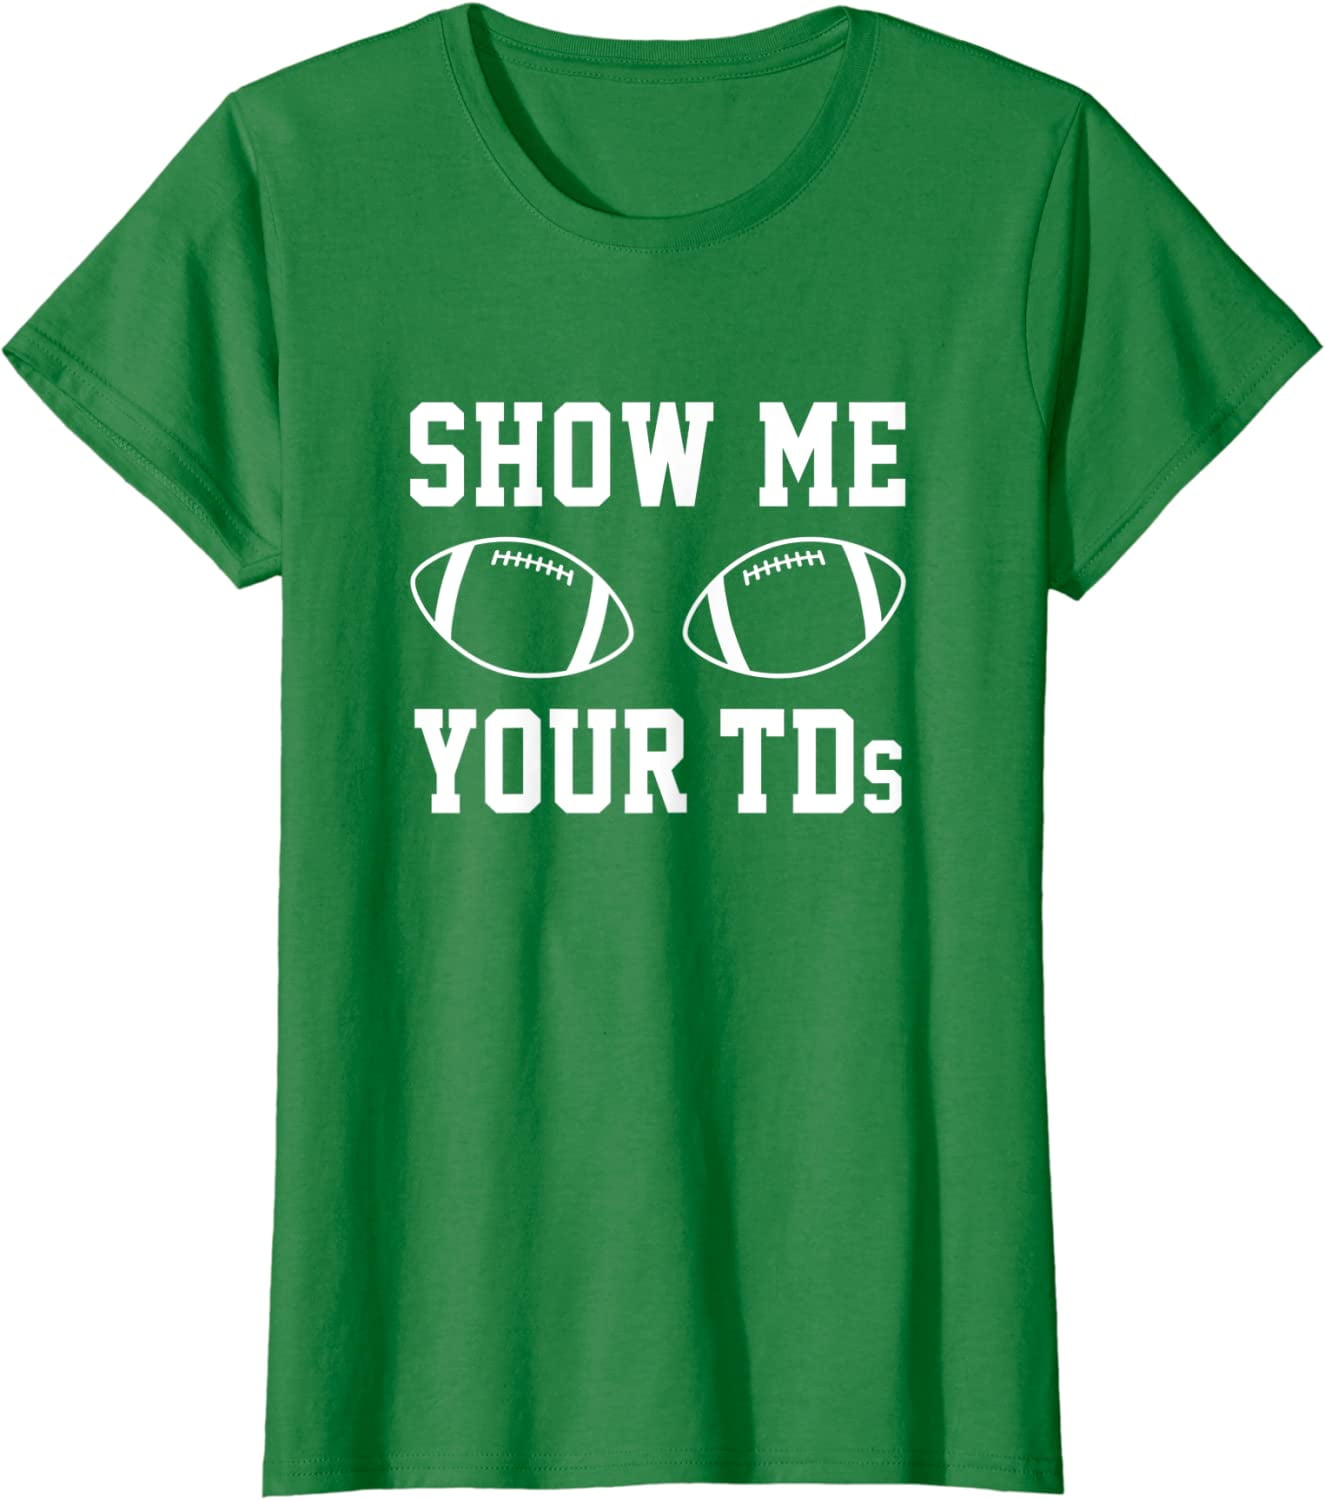 Show Me Your TDs Funny Fantasy Football T-Shirt 